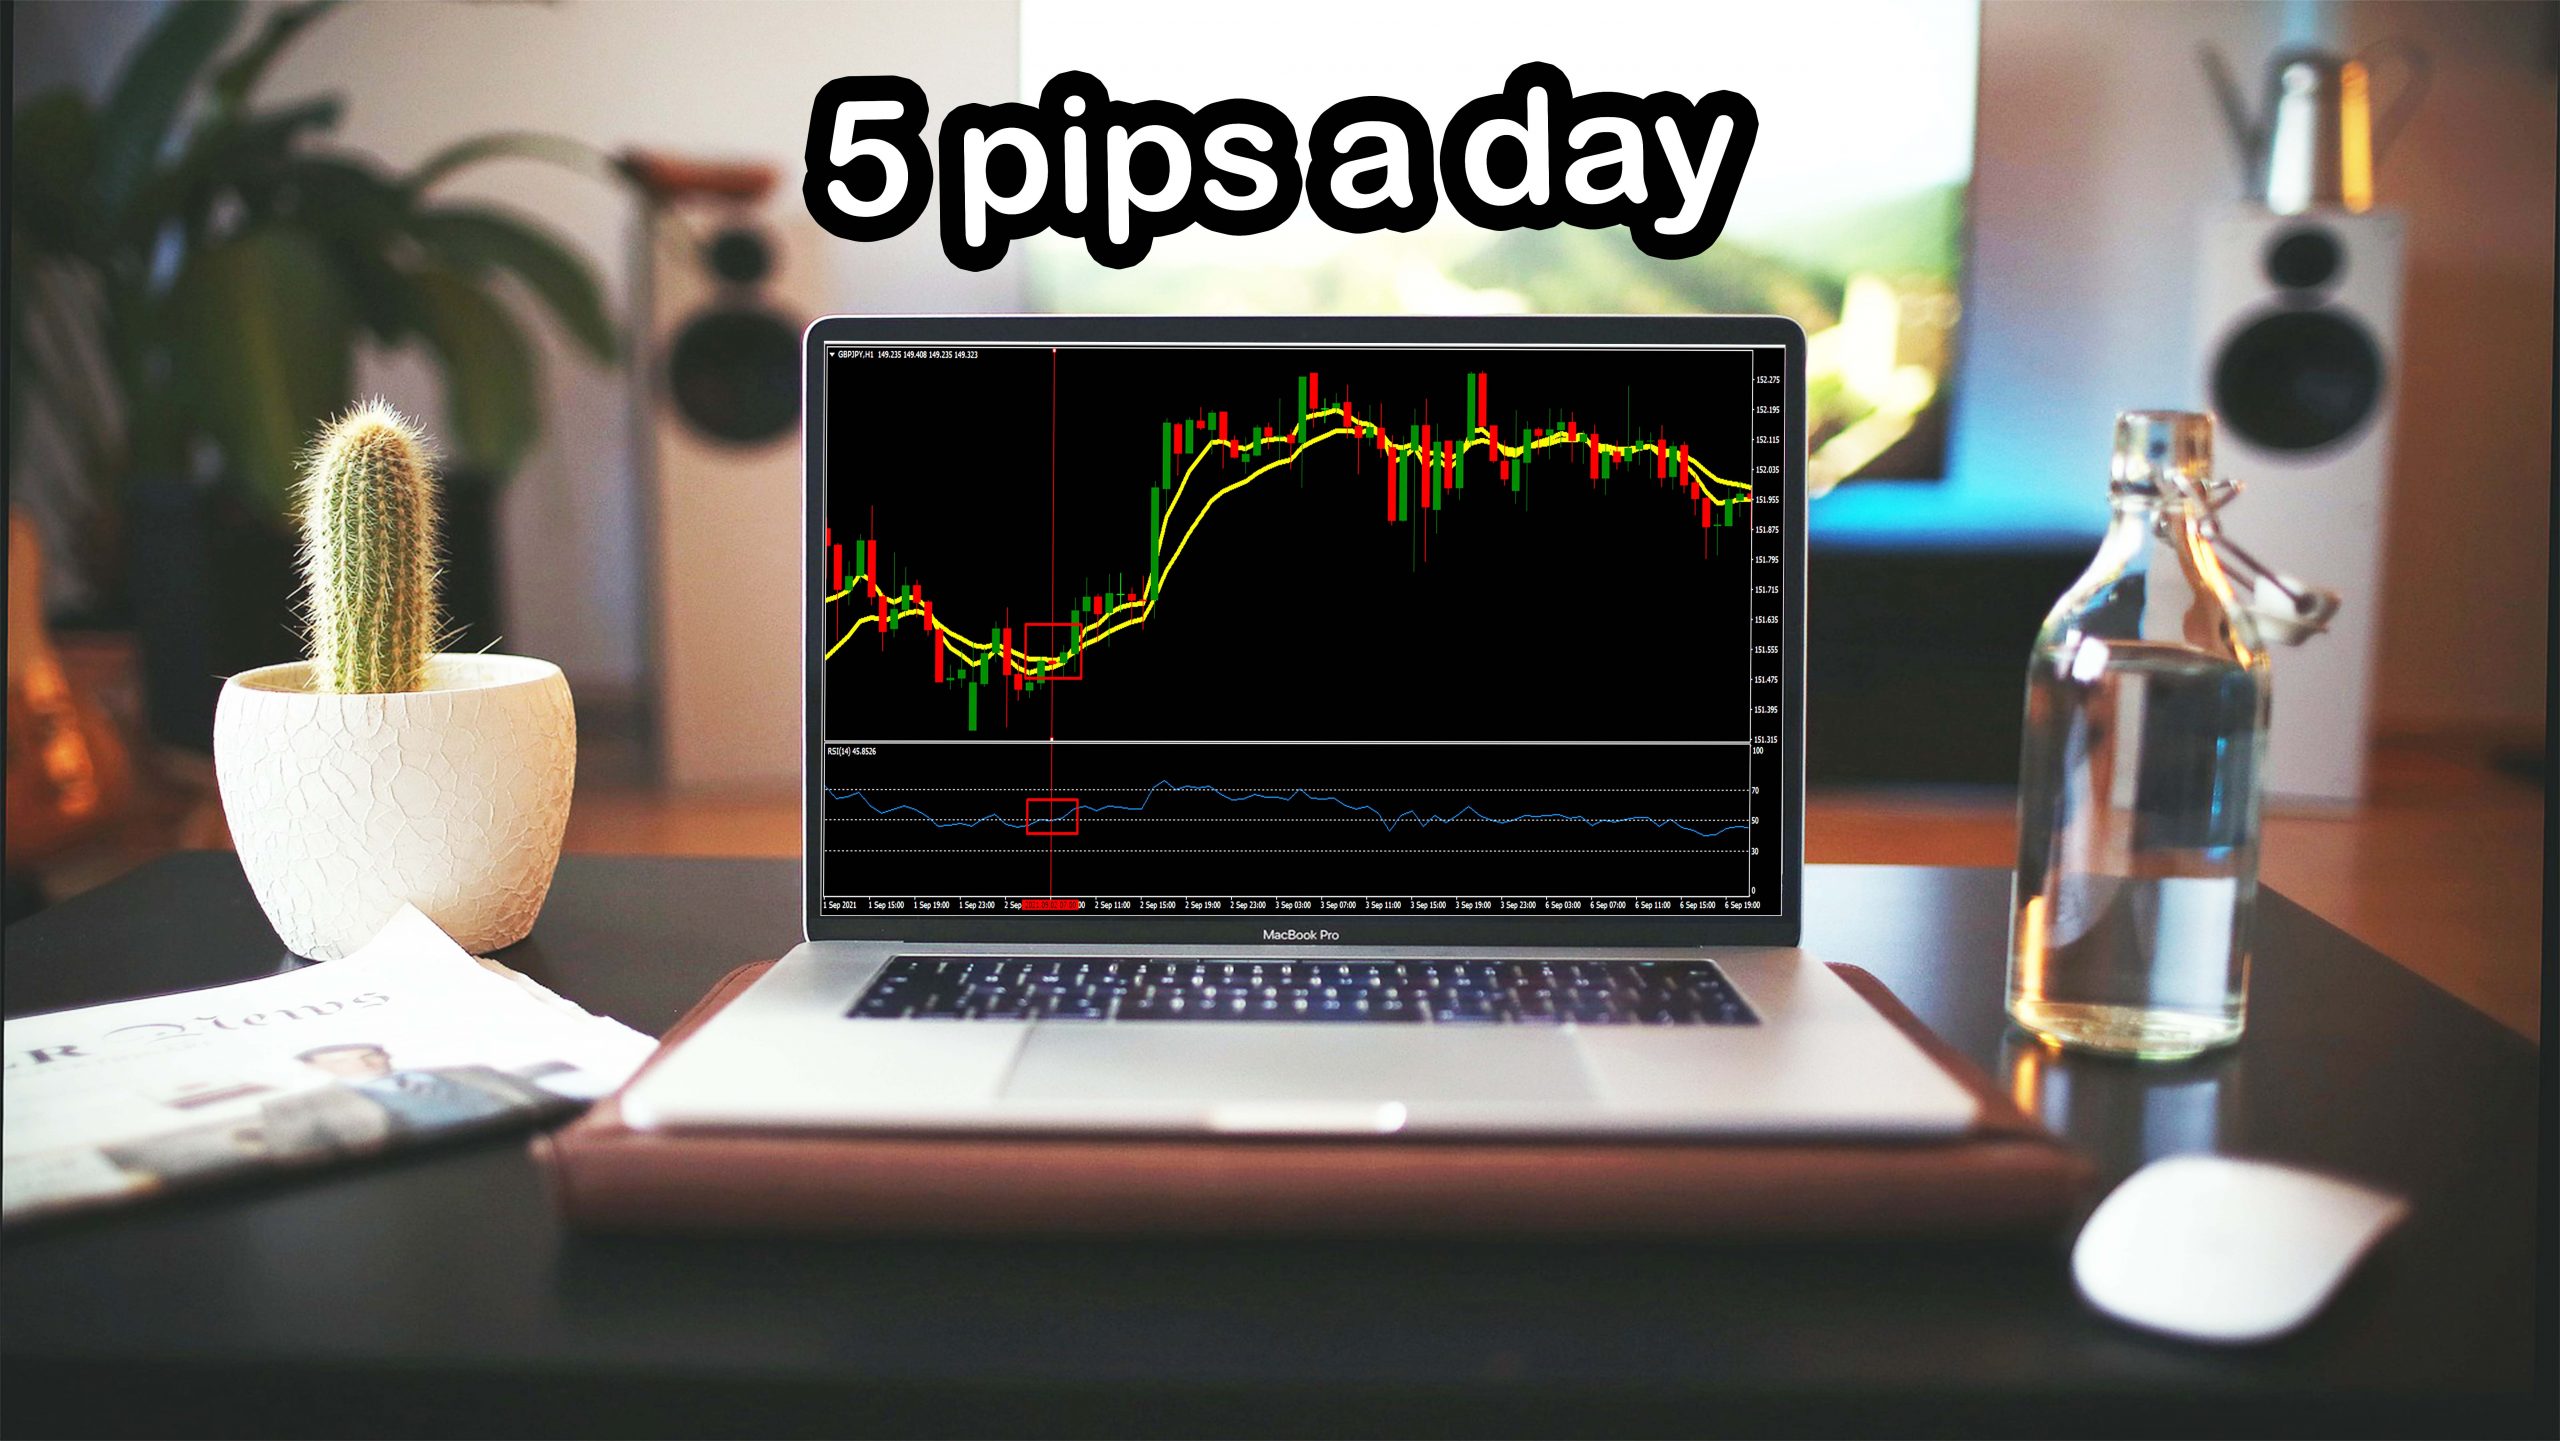 5 pips a day